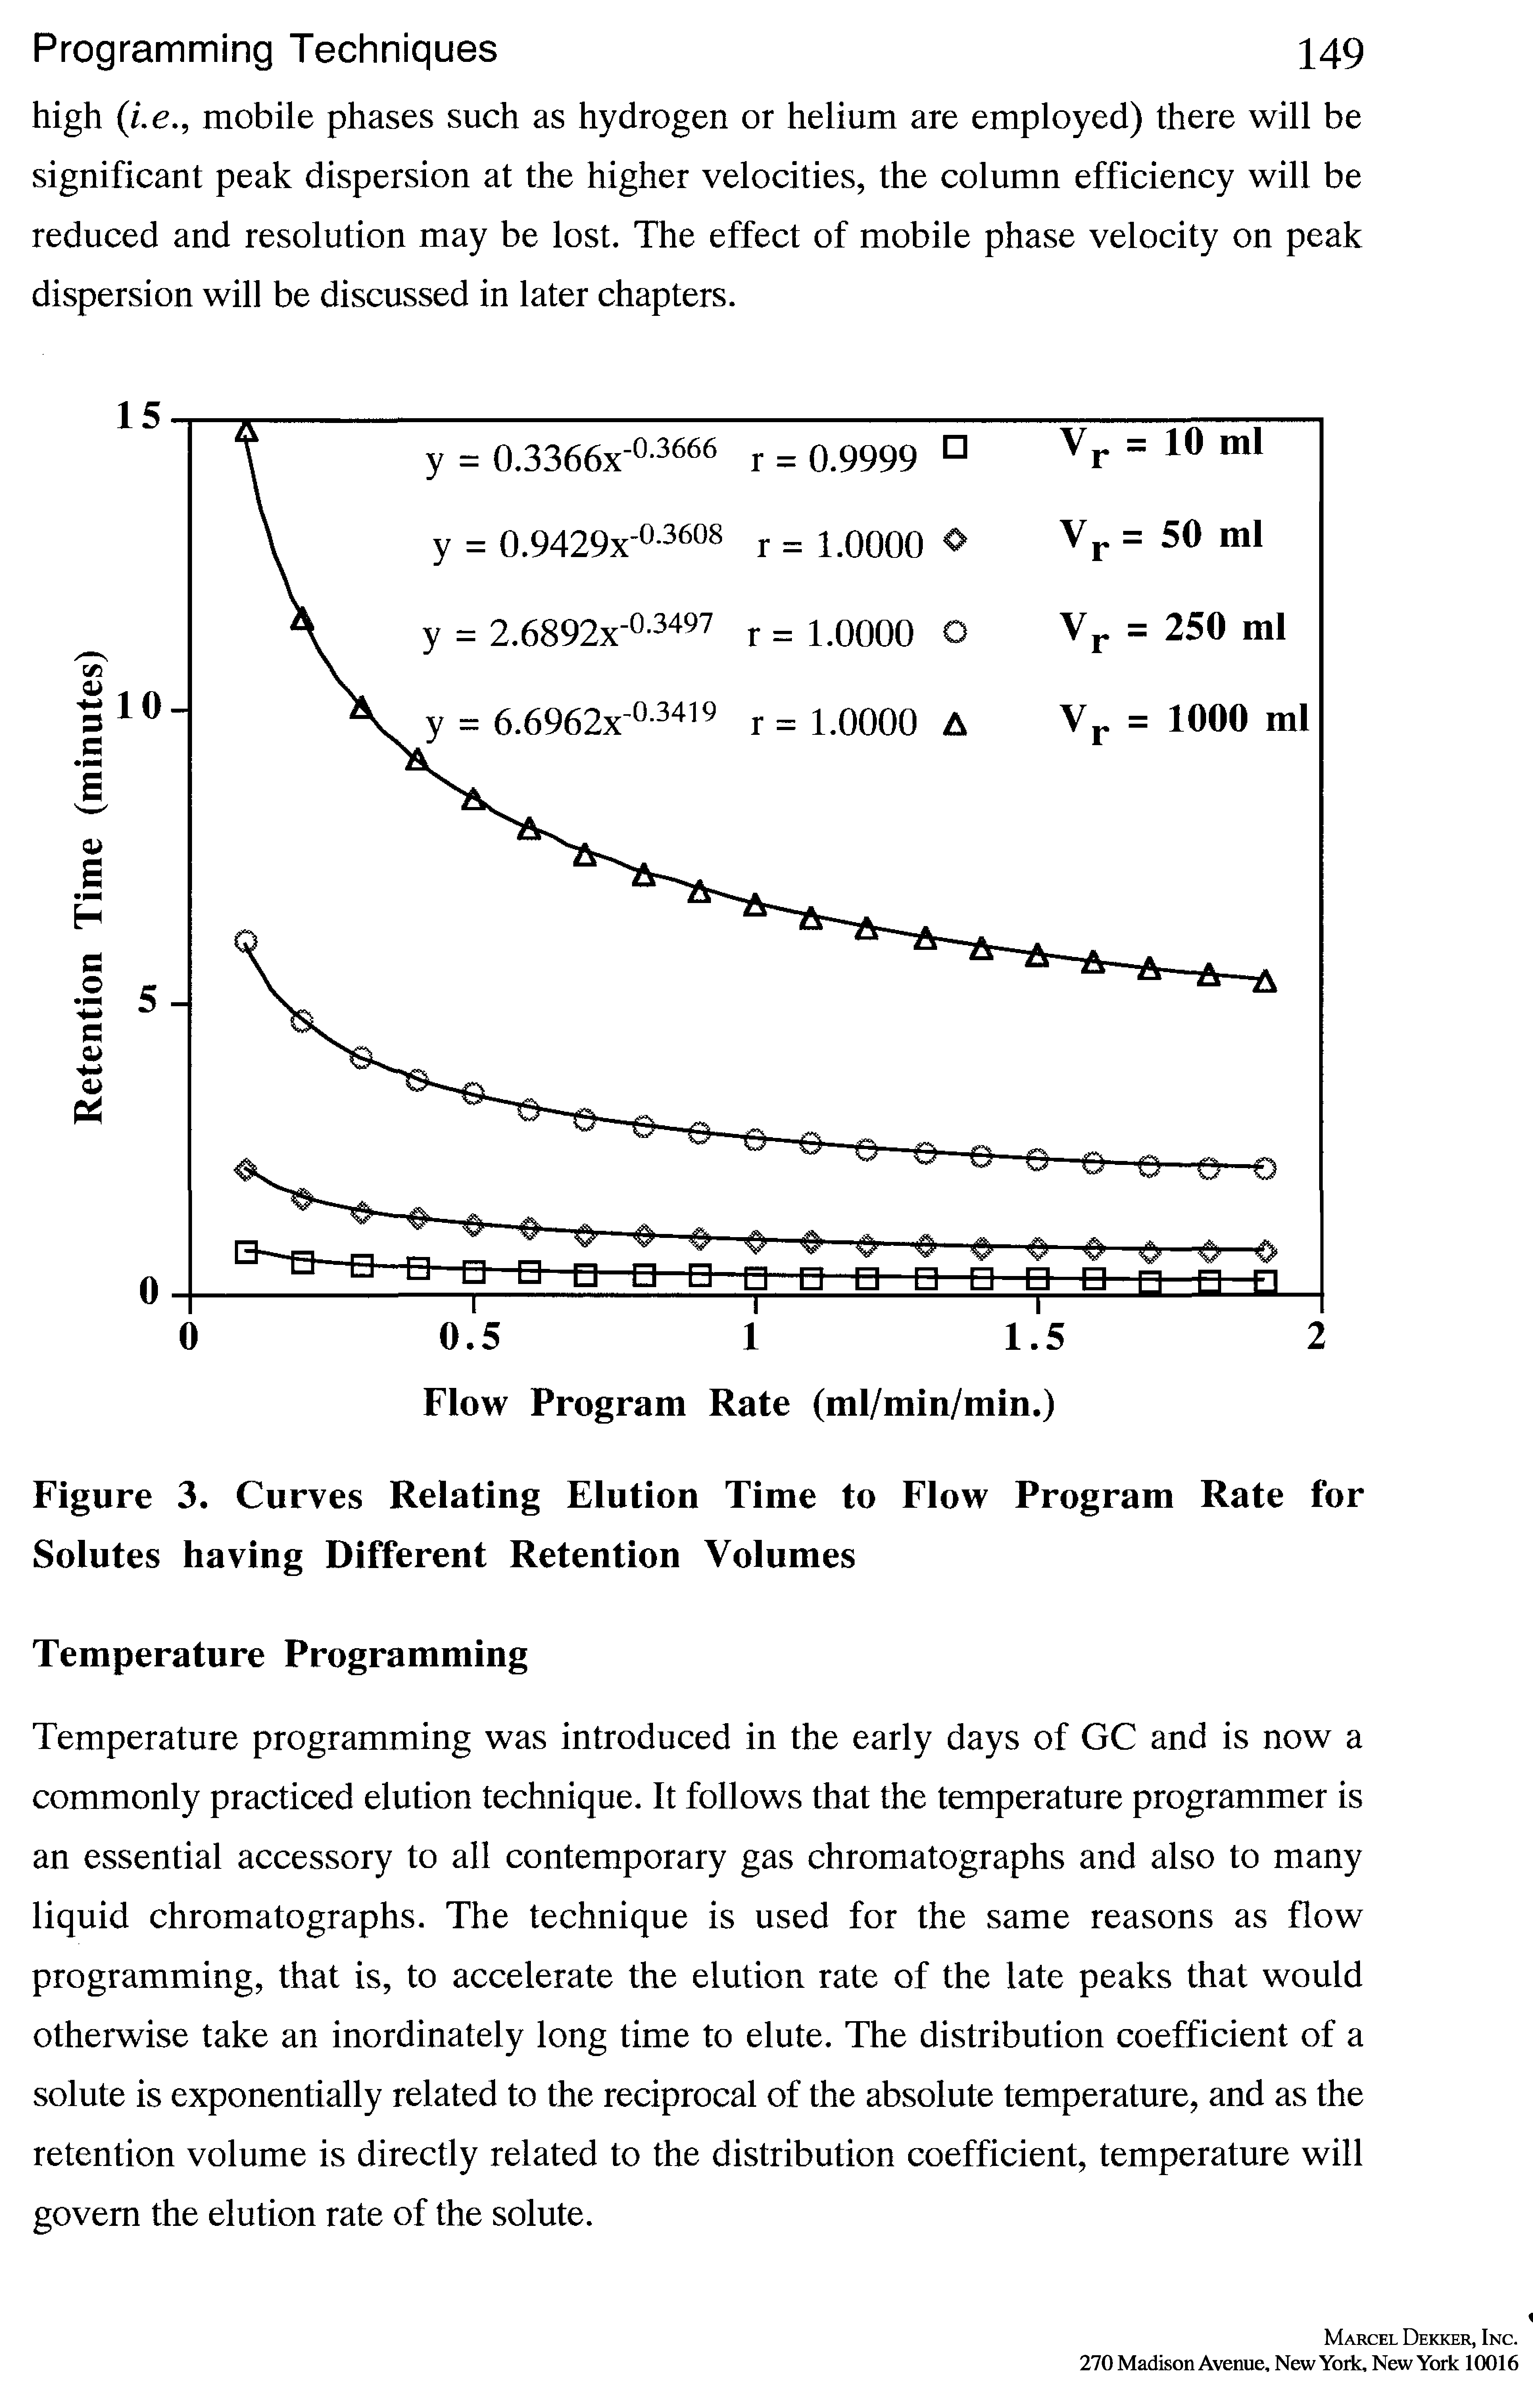 Figure 3. Curves Relating Elution Time to Flow Program Rate for Solutes having Different Retention Volumes...